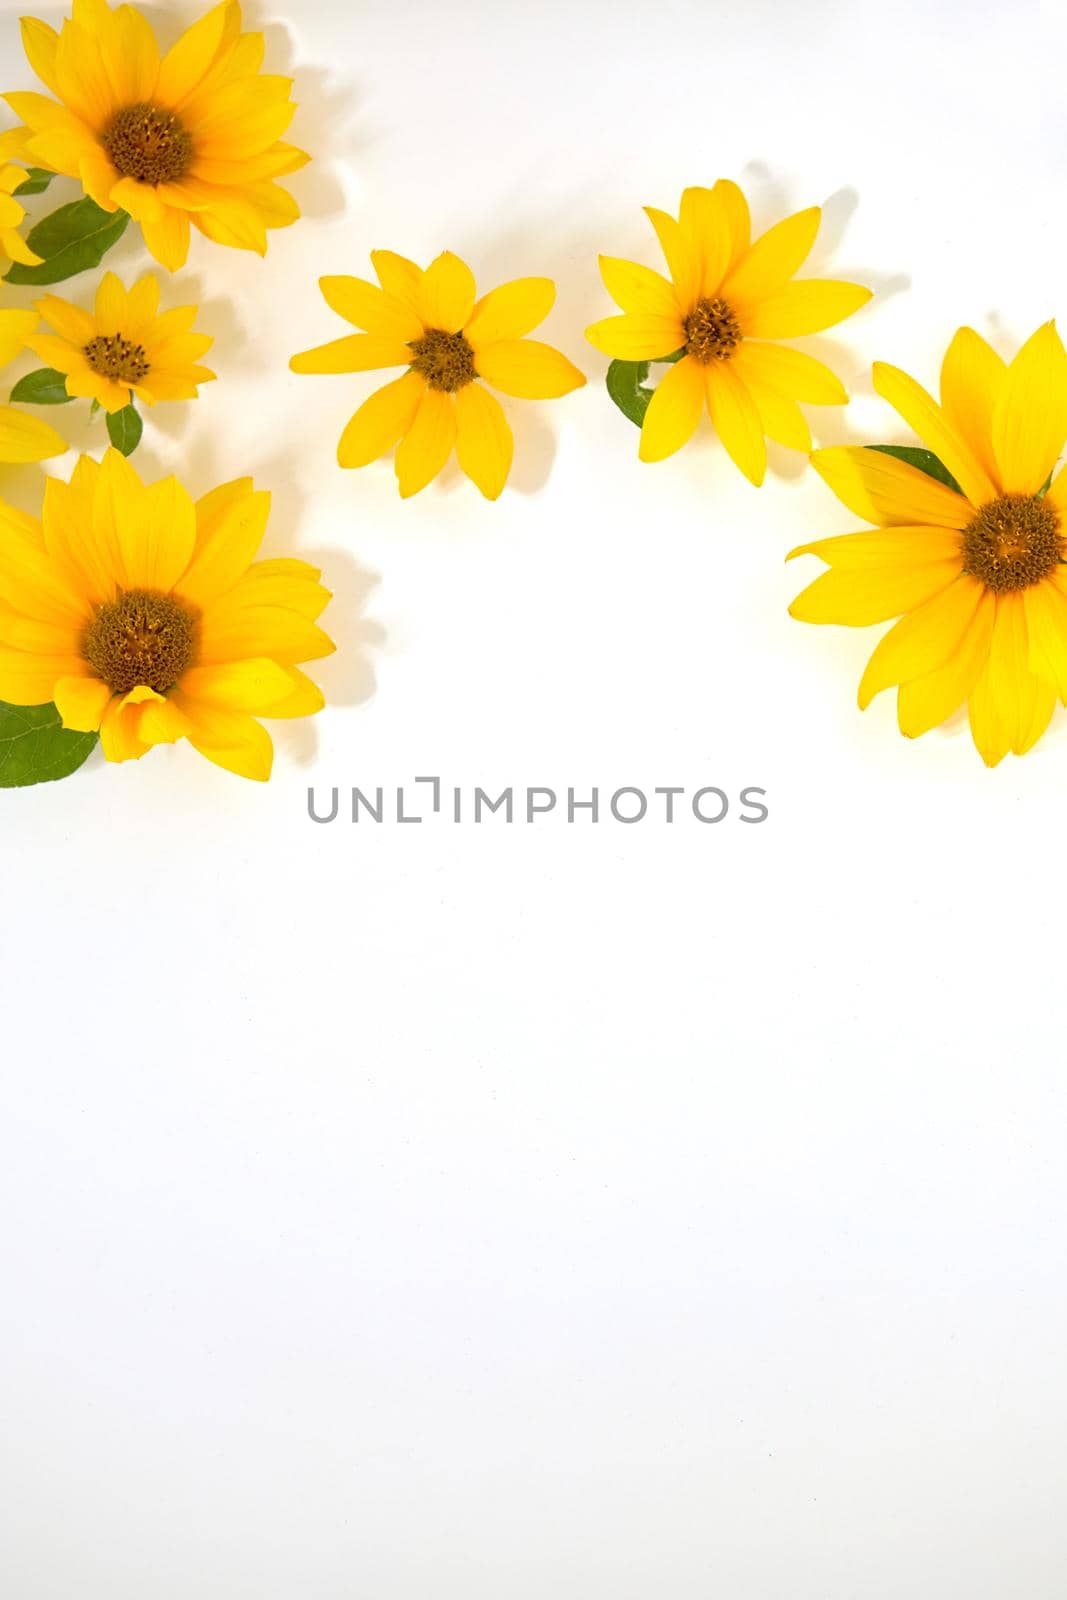 From above of bright yellow gerbera daisy flowers with green foliage composed on white background with empty space